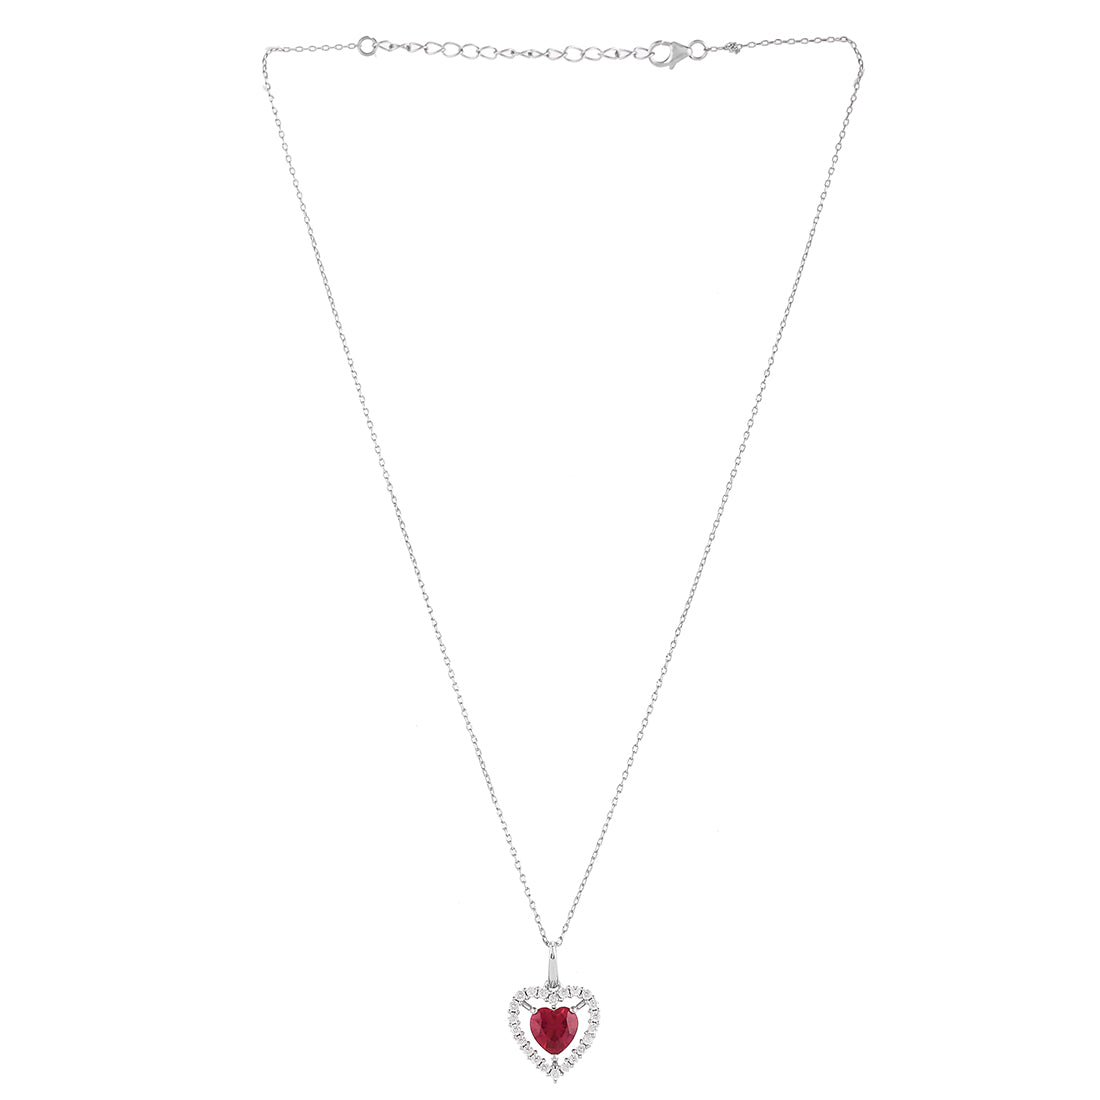 Sterling Silver Red Heart Shaped Pendant